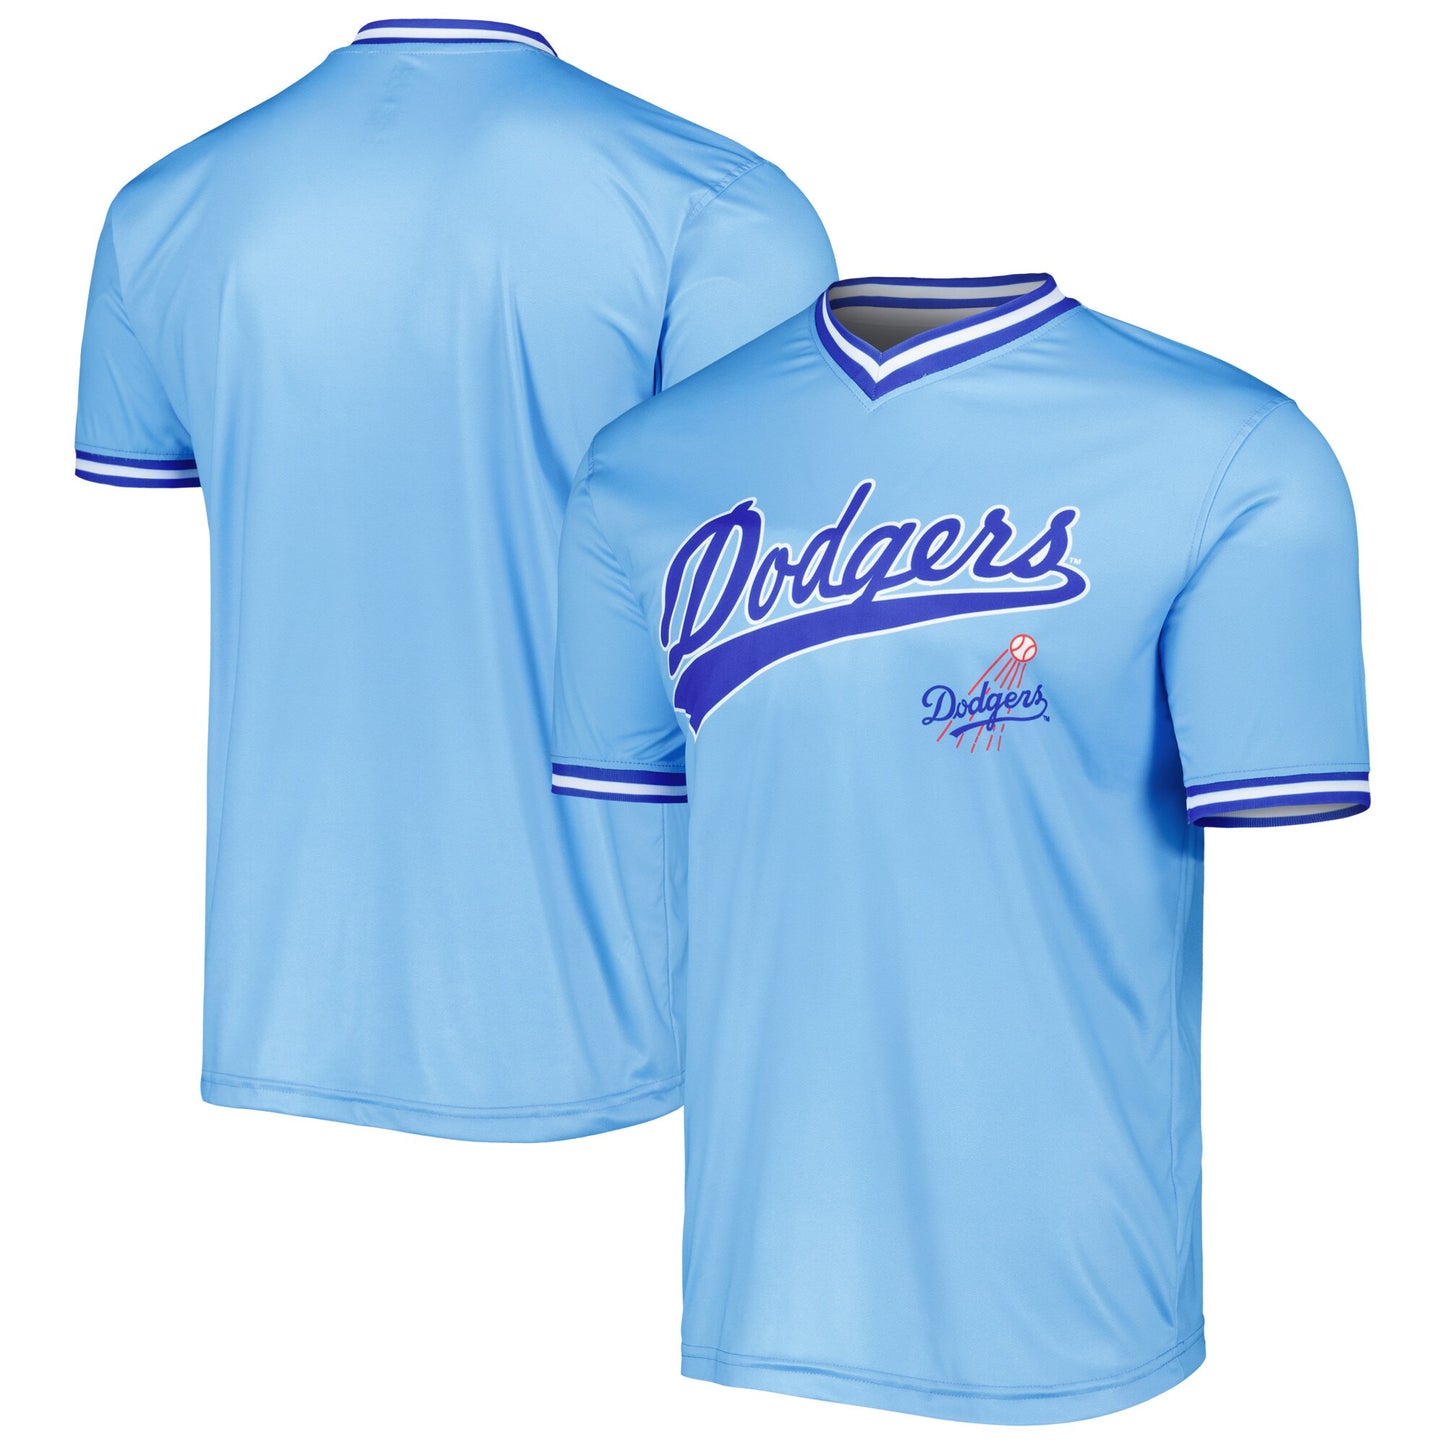 Los Angeles Dodgers Stitches Cooperstown Collection Team Jersey - Light Blue